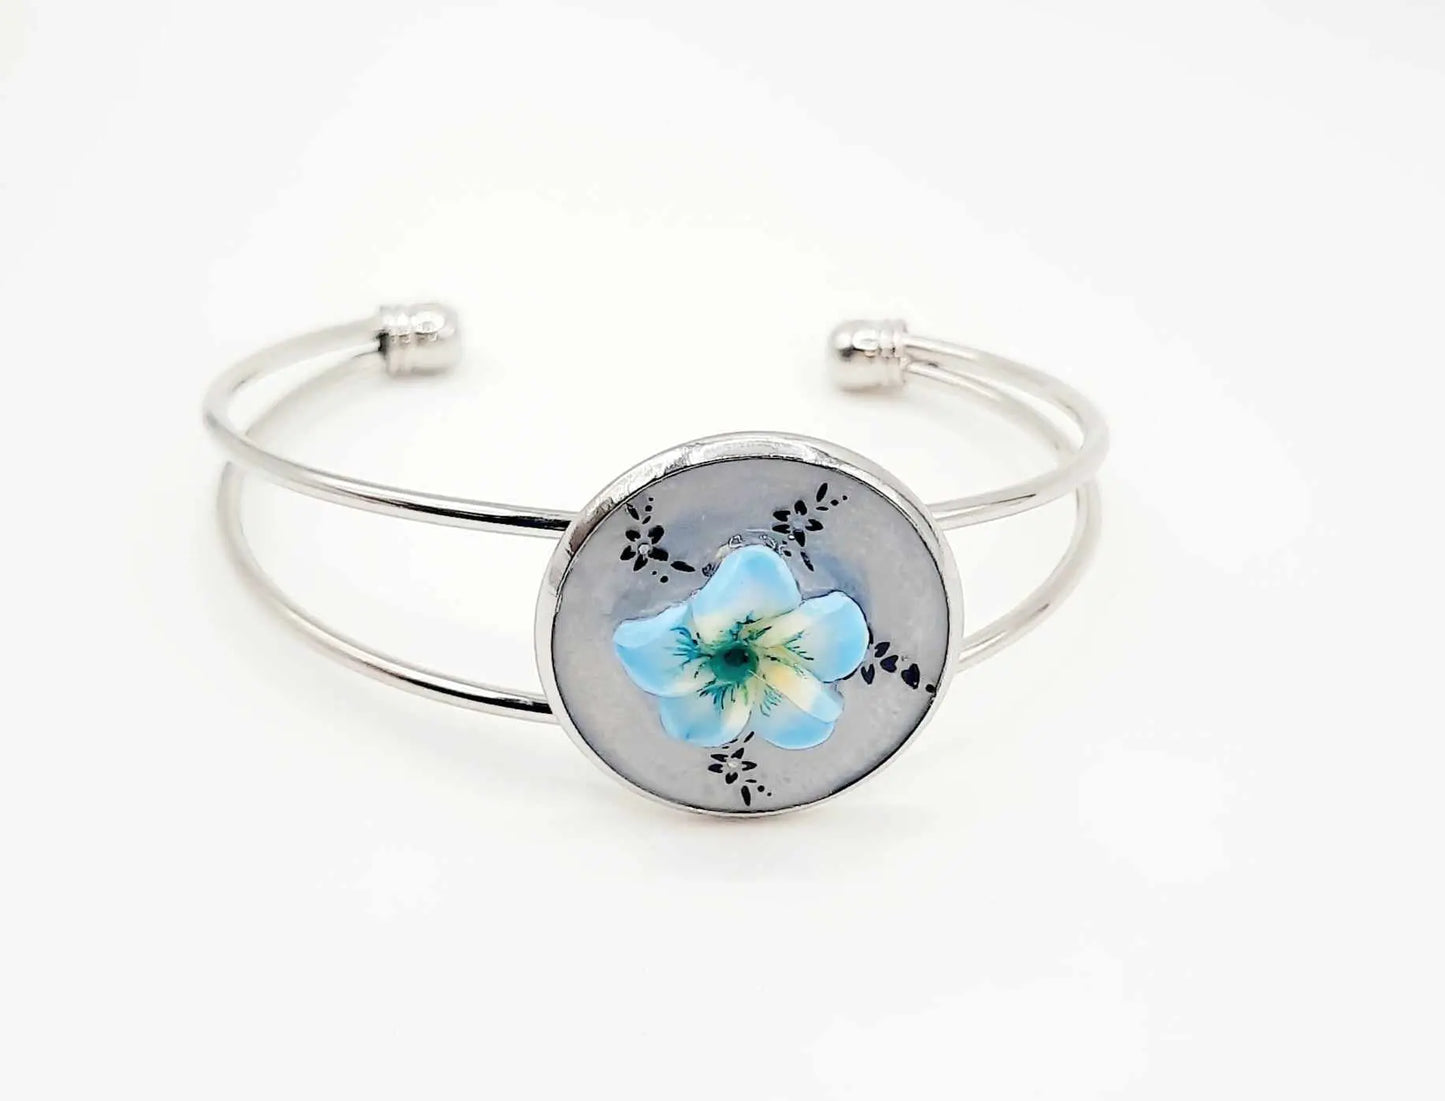 Free matching earrings handcrafted blue polymer flower cuff bracelet - Image #1